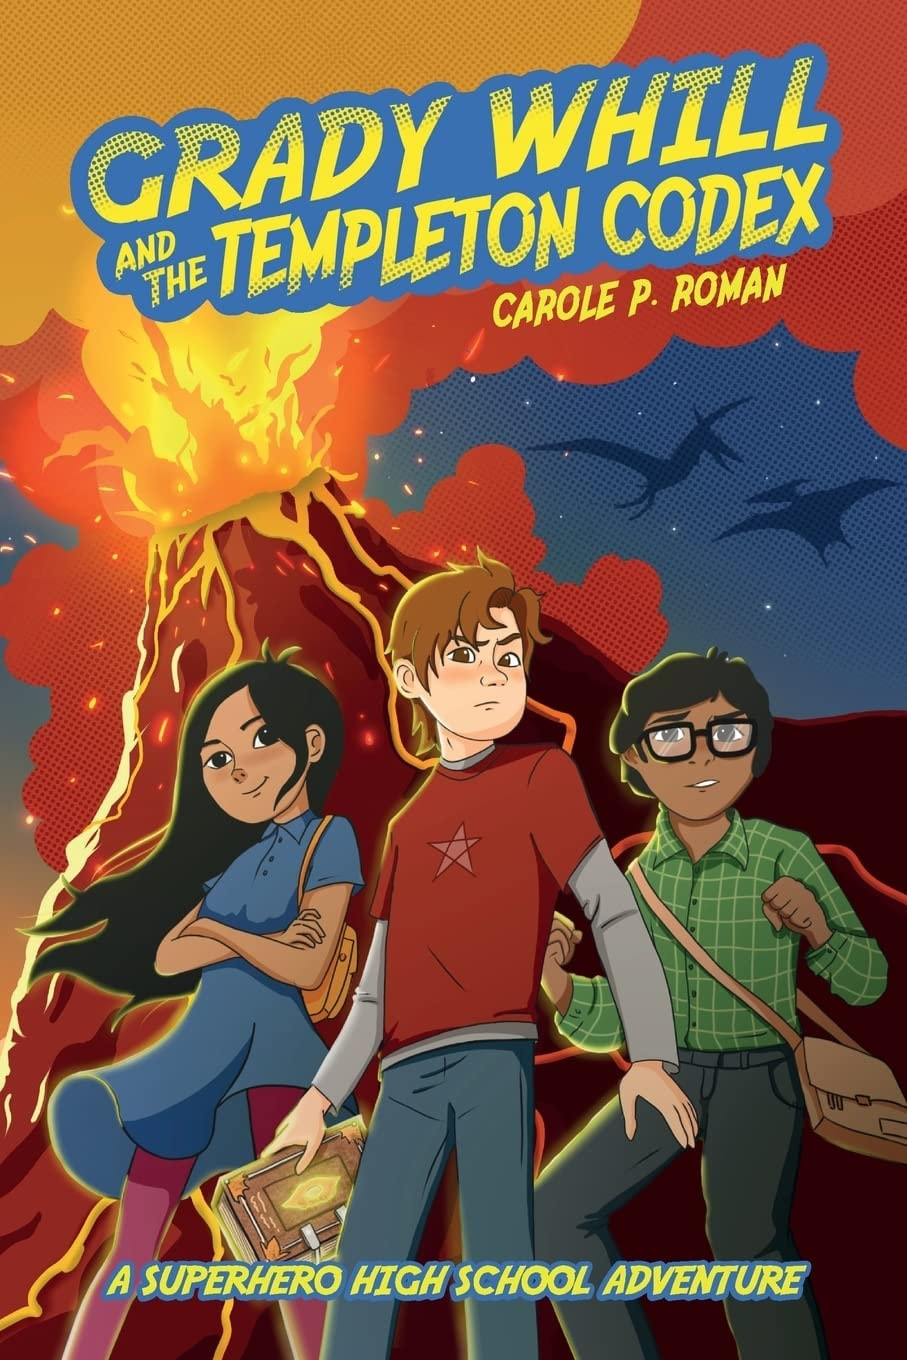 GRADY WHILL AND THE TEMPLETON CODEX by Carole P. Roman